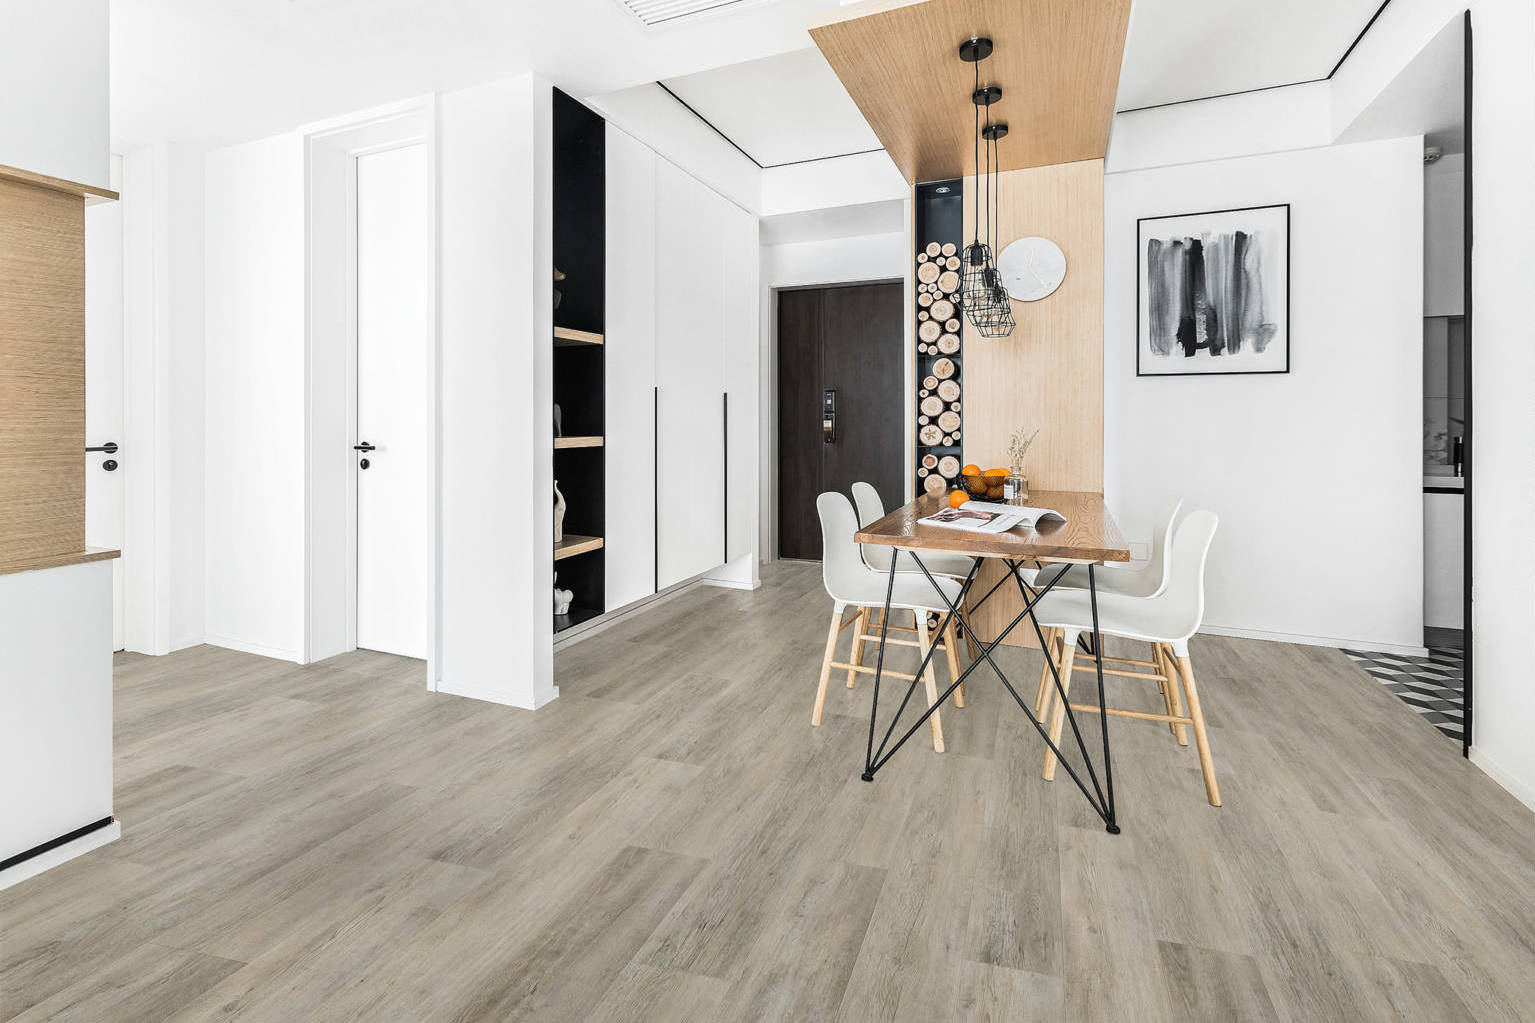 Timber Ridge Gold 12 1 | Qualis Ceramica | Luxury Tile and Vinyl at affordable prices